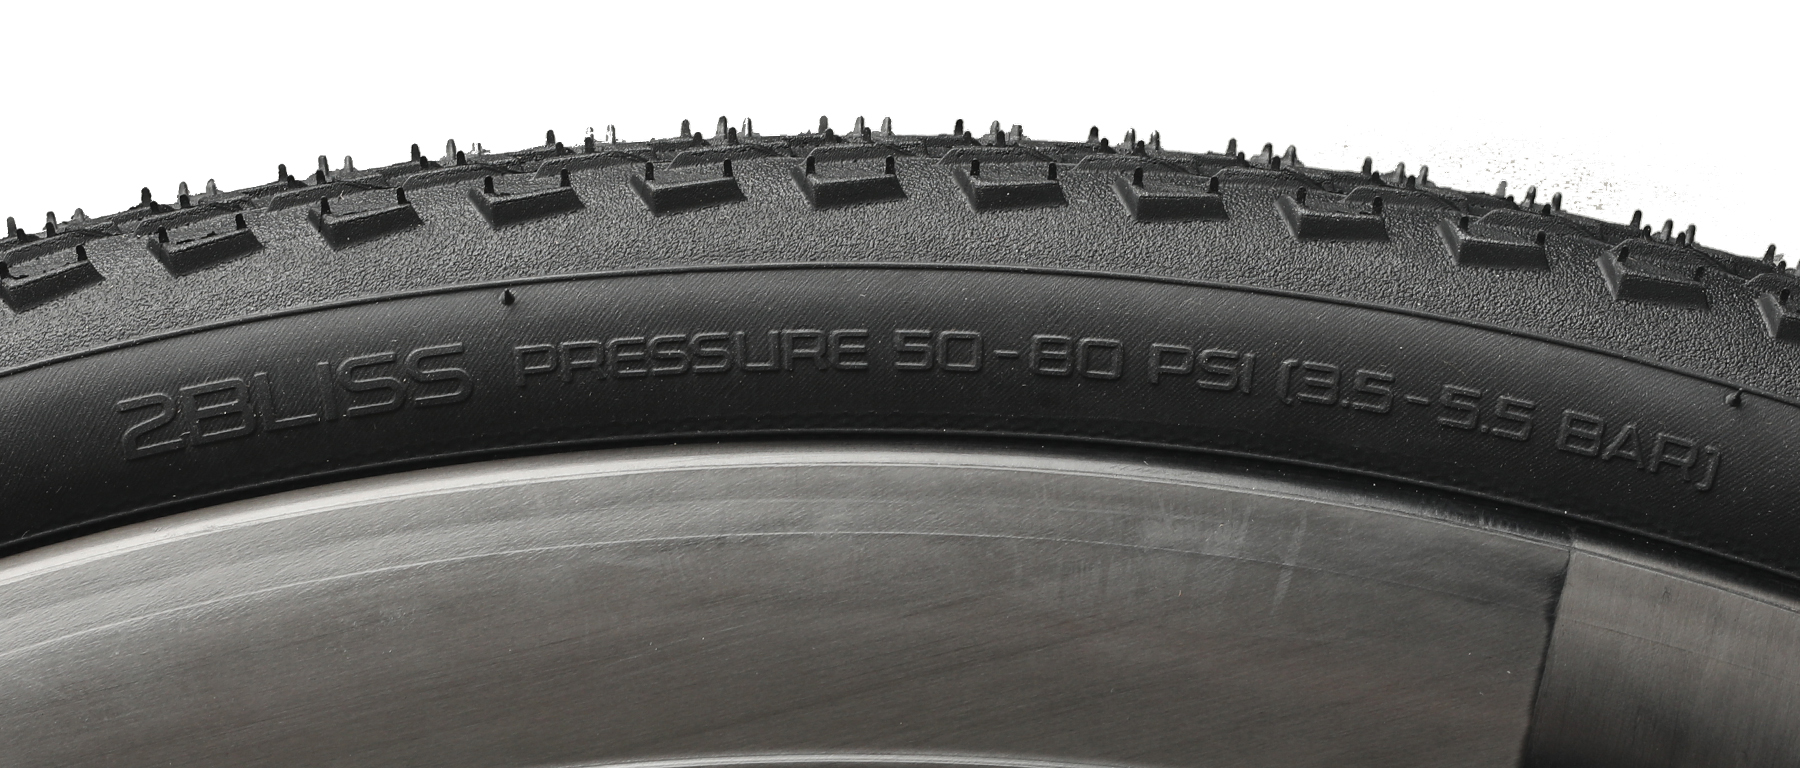 Specialized Tracer Pro 2Bliss Gravel Tire